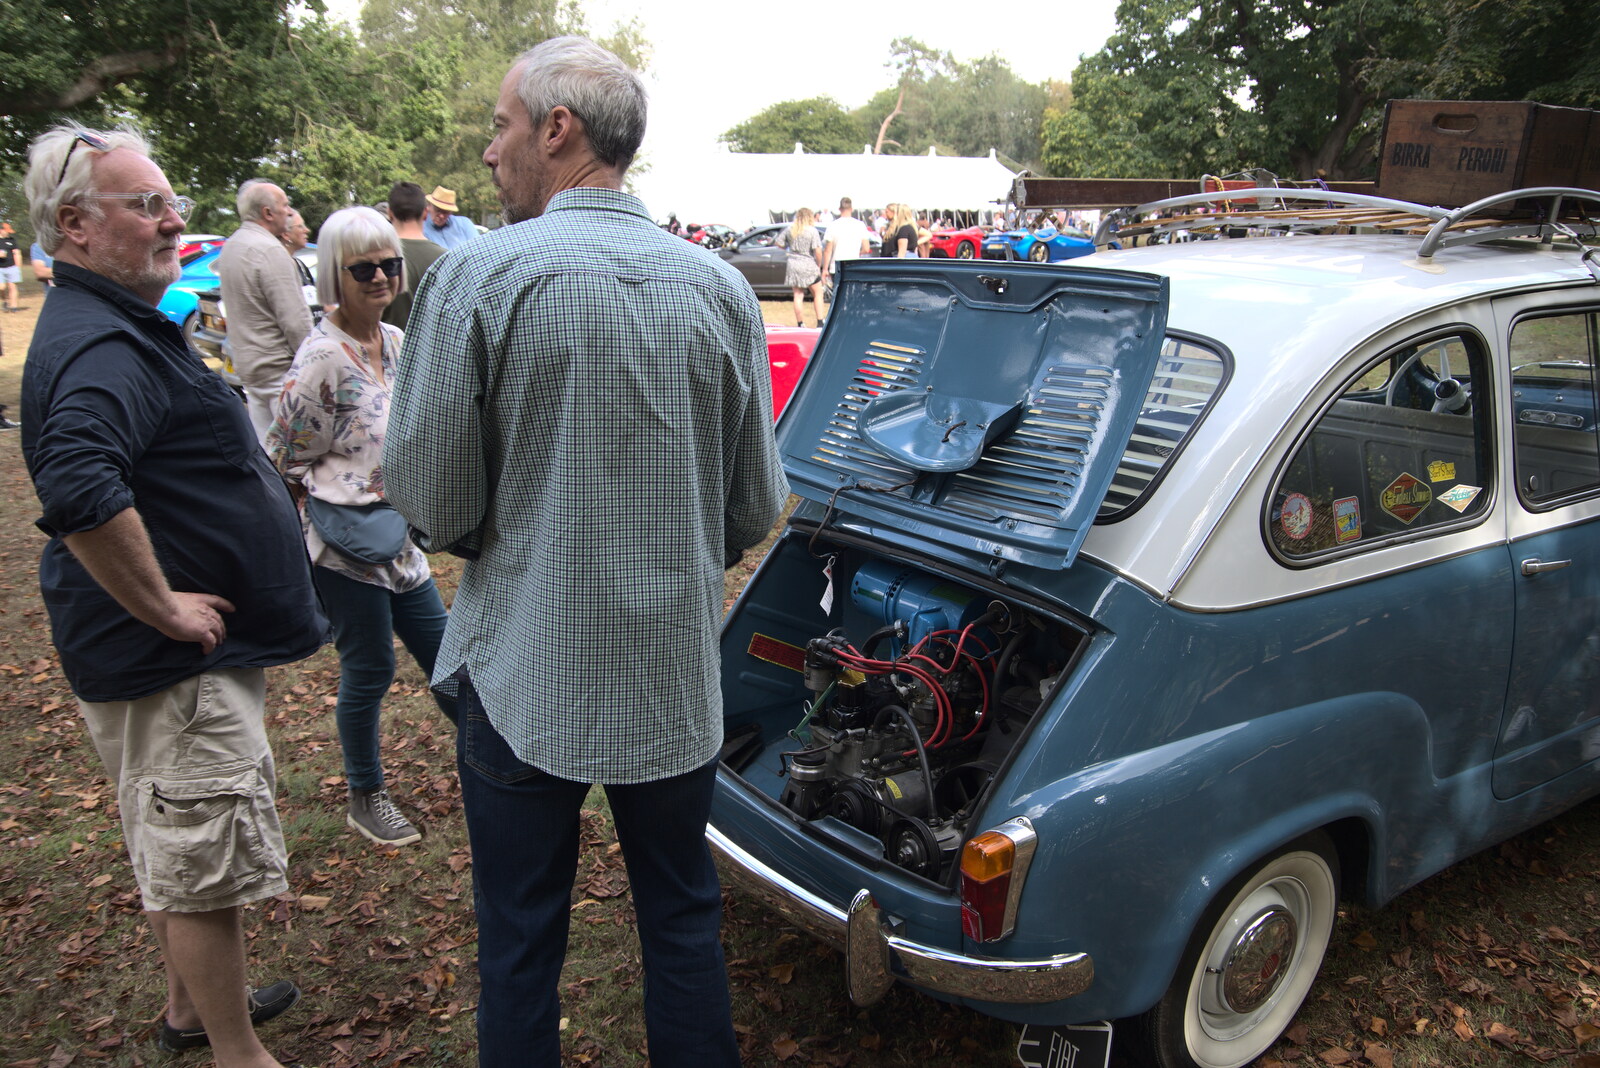 Italian Cars and a Royal Proclamation, Eye, Suffolk - 11th September 2022: The odd campervan has a tiny engine in the back